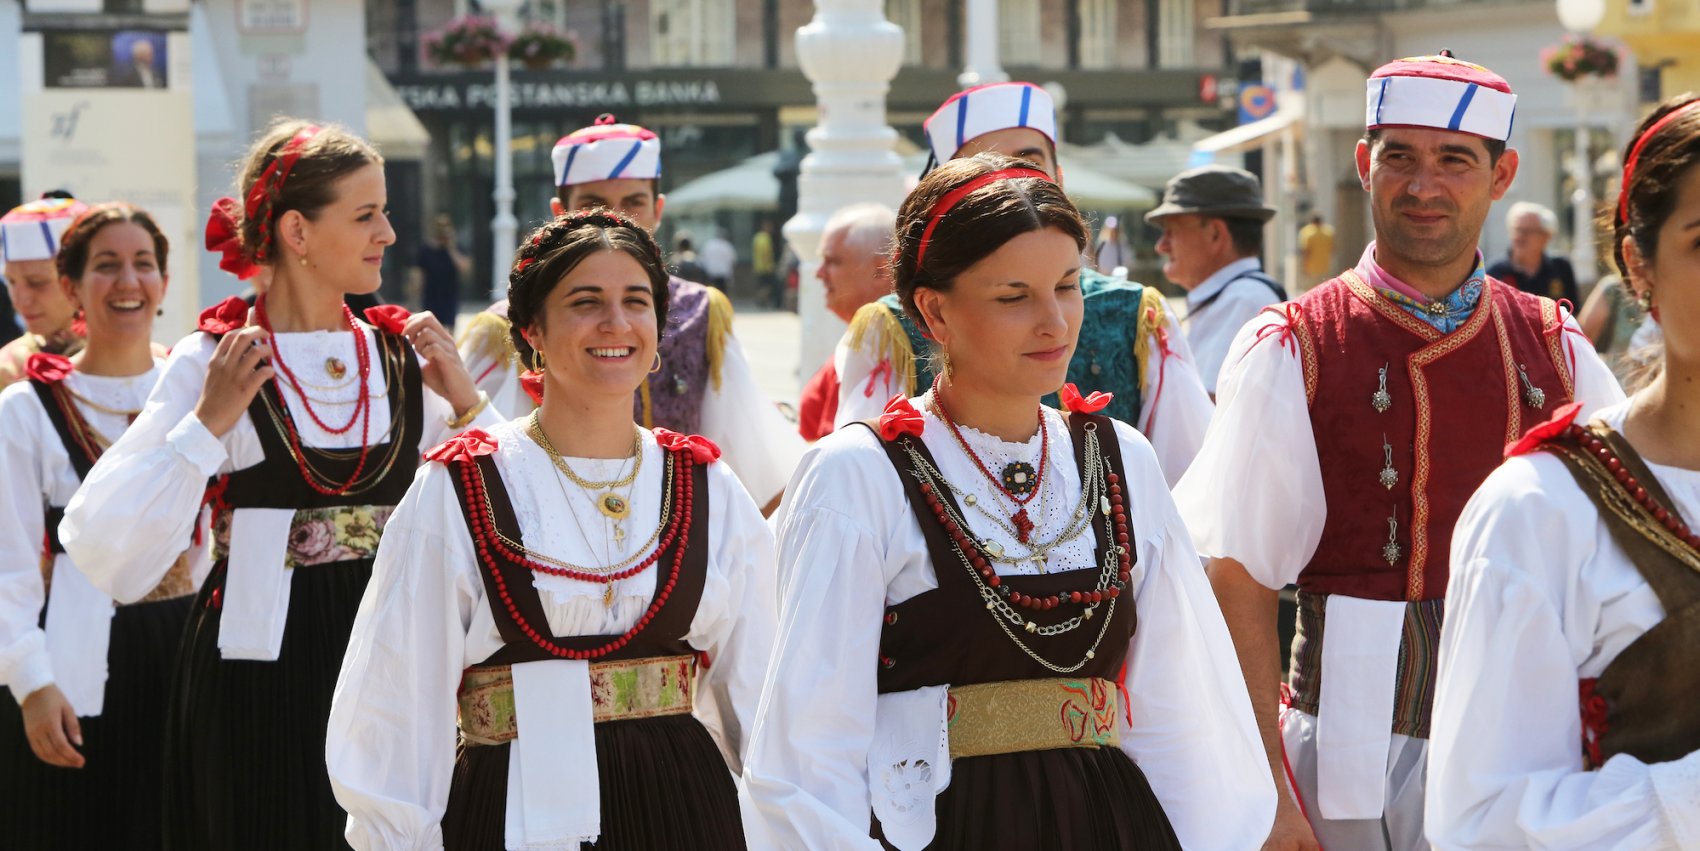 A group of people dressed in traditional Croatian attire attending a cultural heritage festival